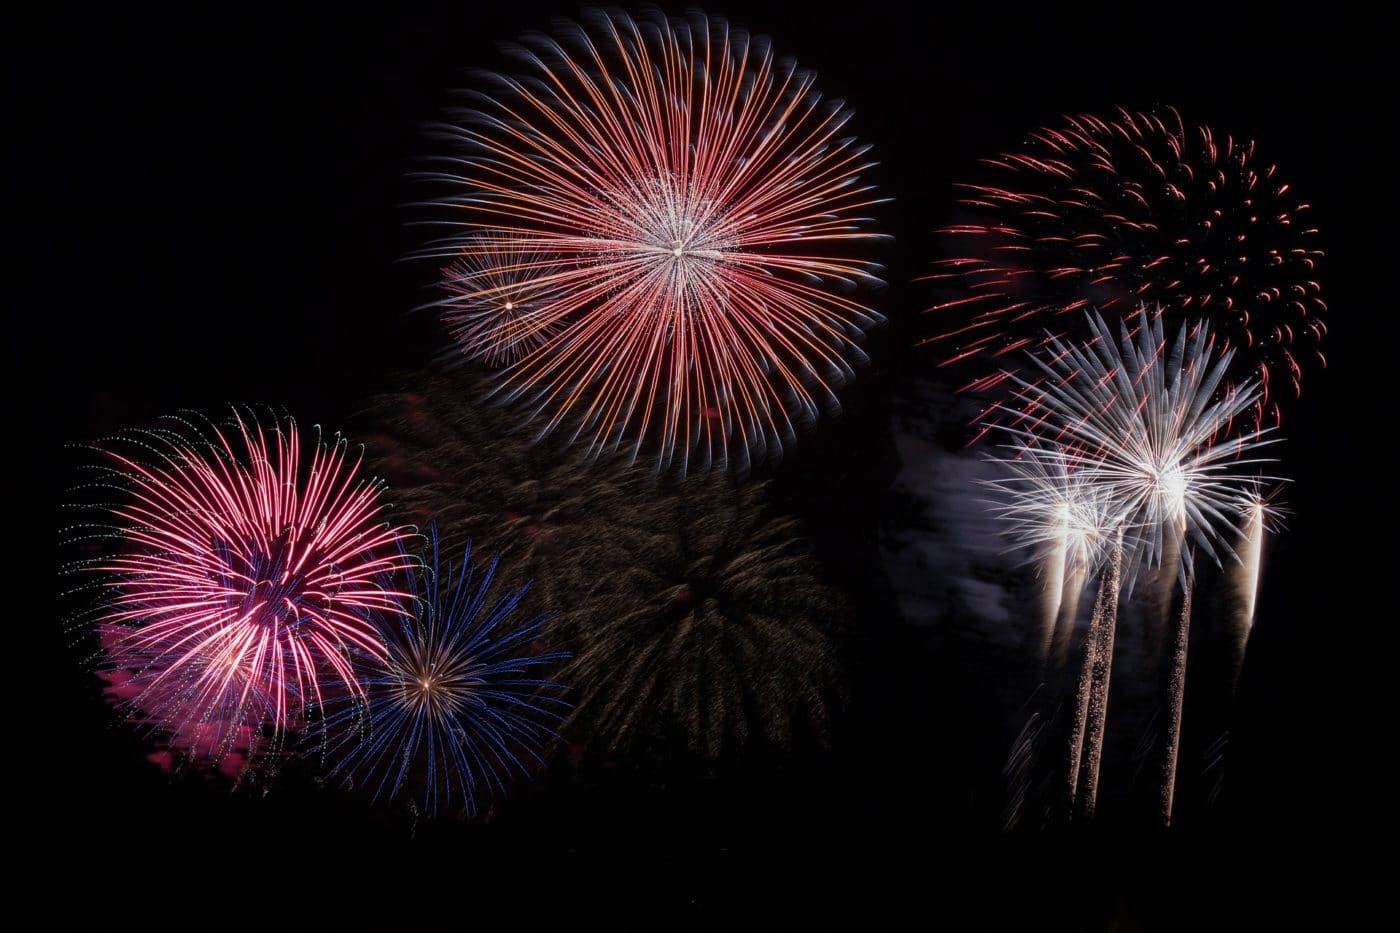 Best places to celebrate the 4th of july in los angeles